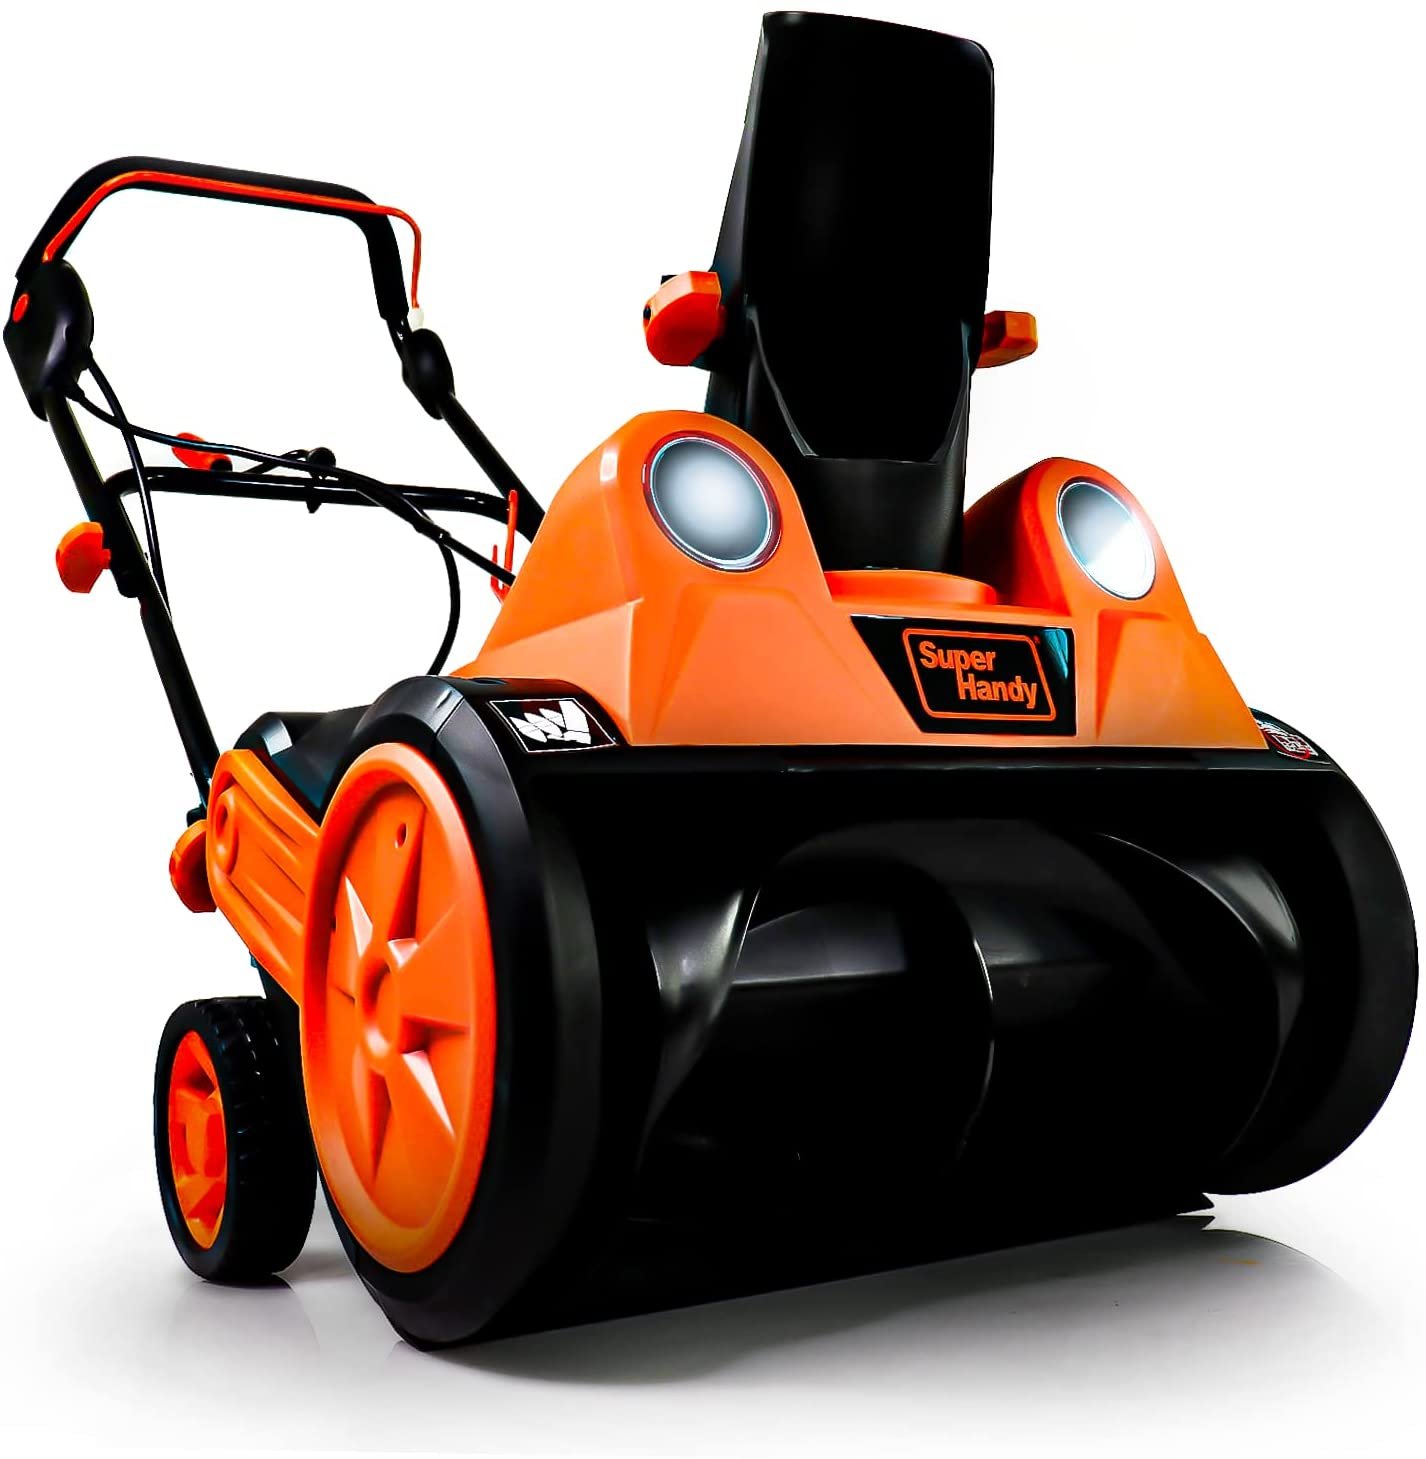 SuperHandy Electric Snow Thrower